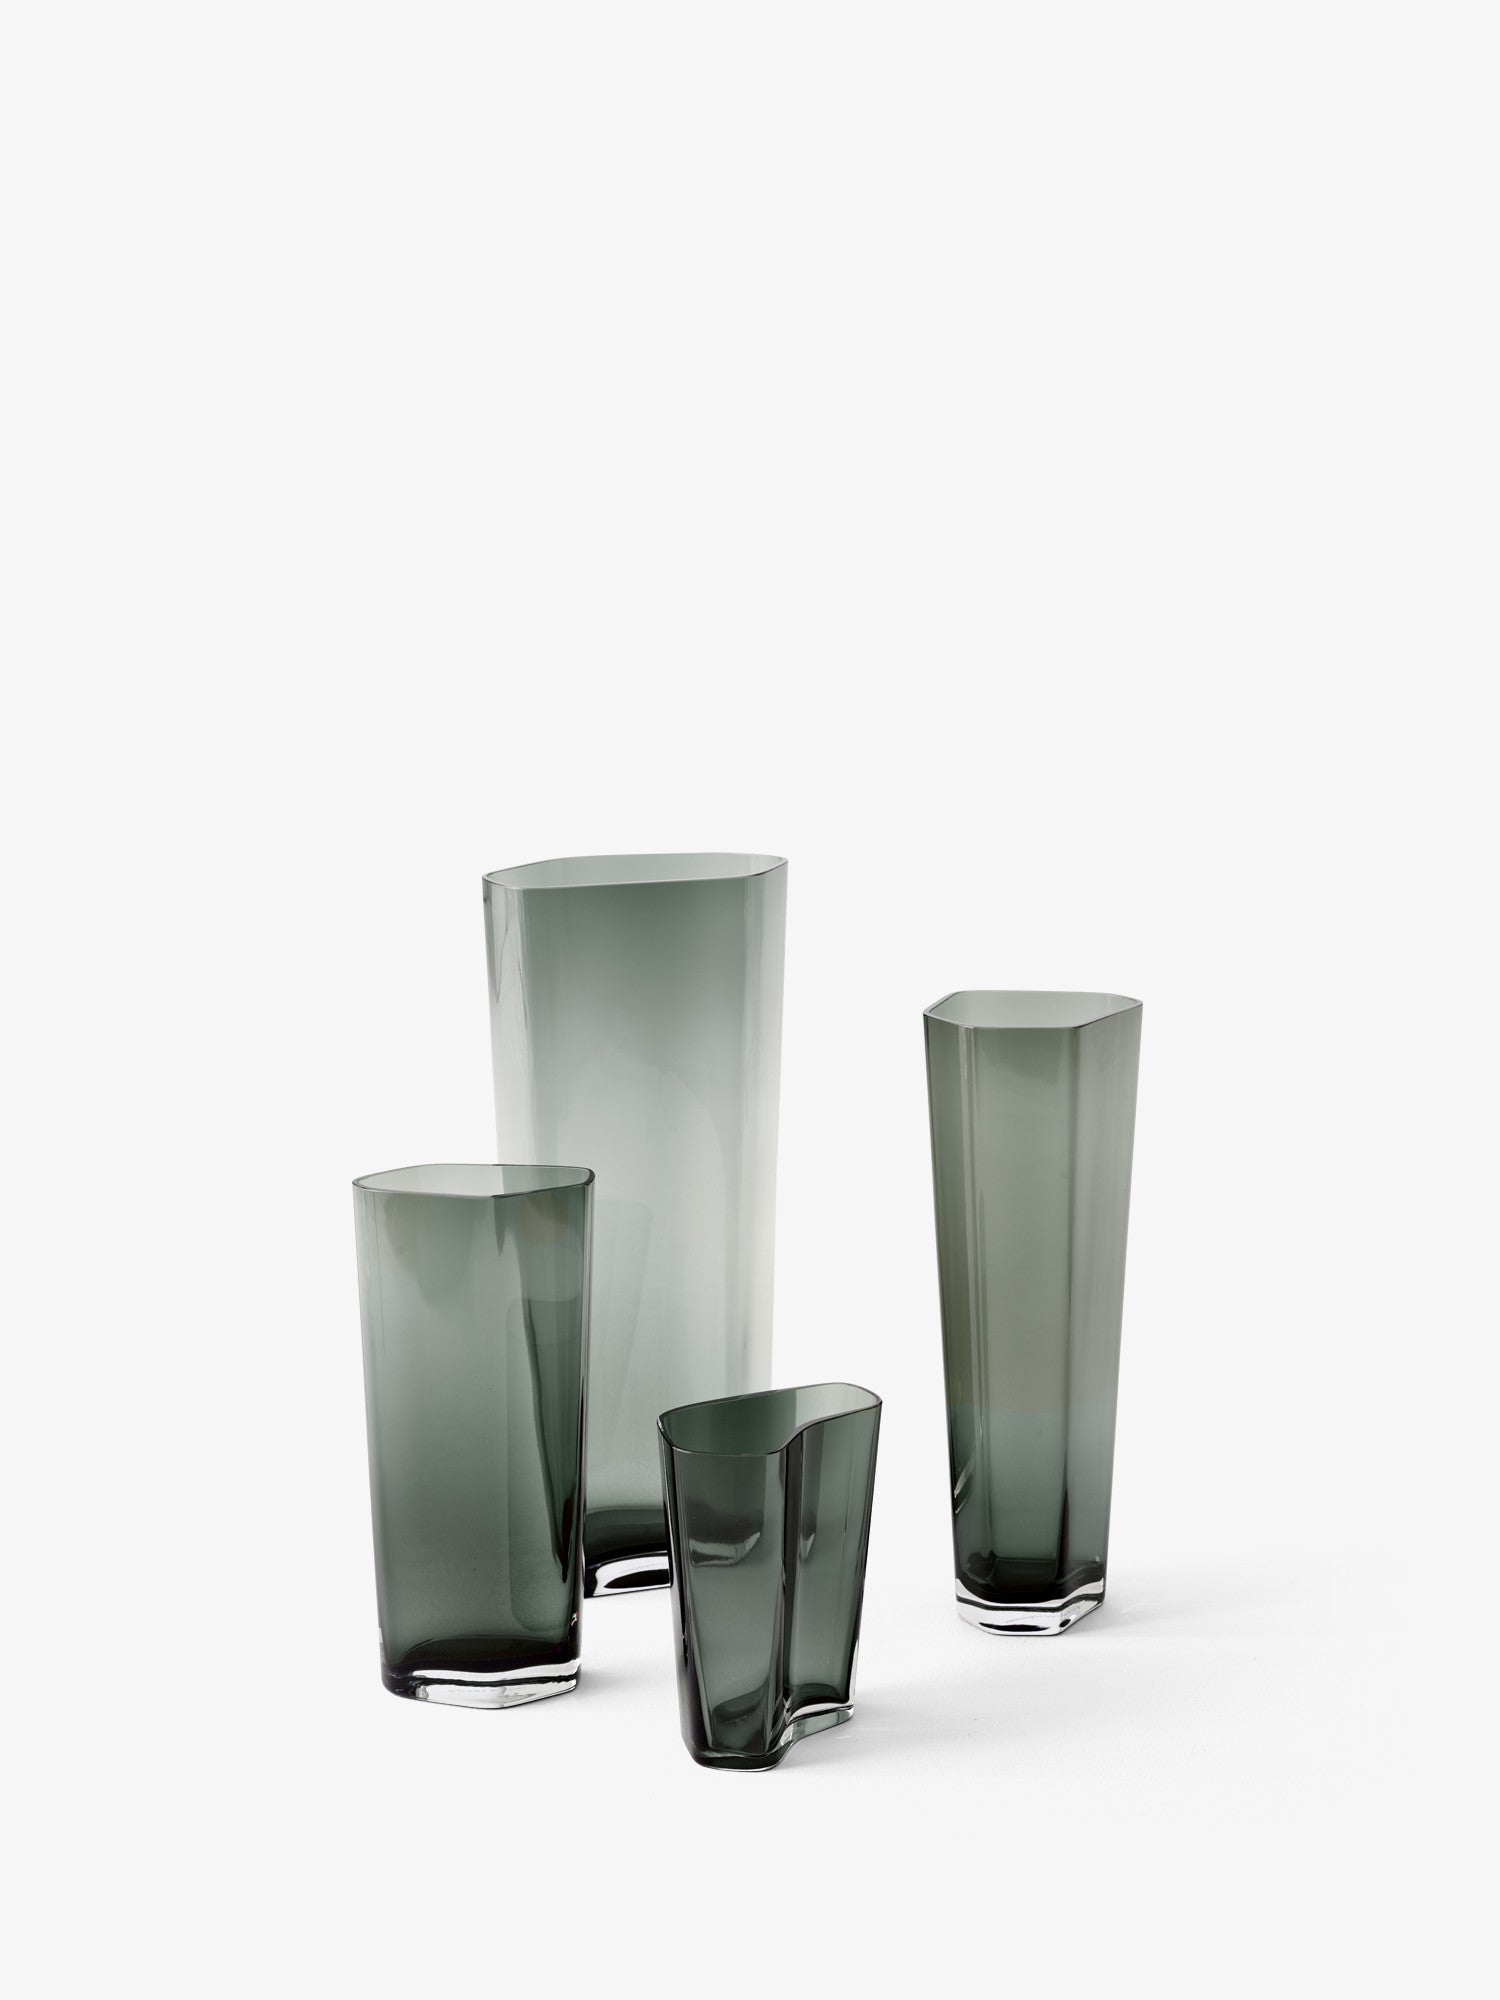 Collect SC37 Glass Vase, Smoked